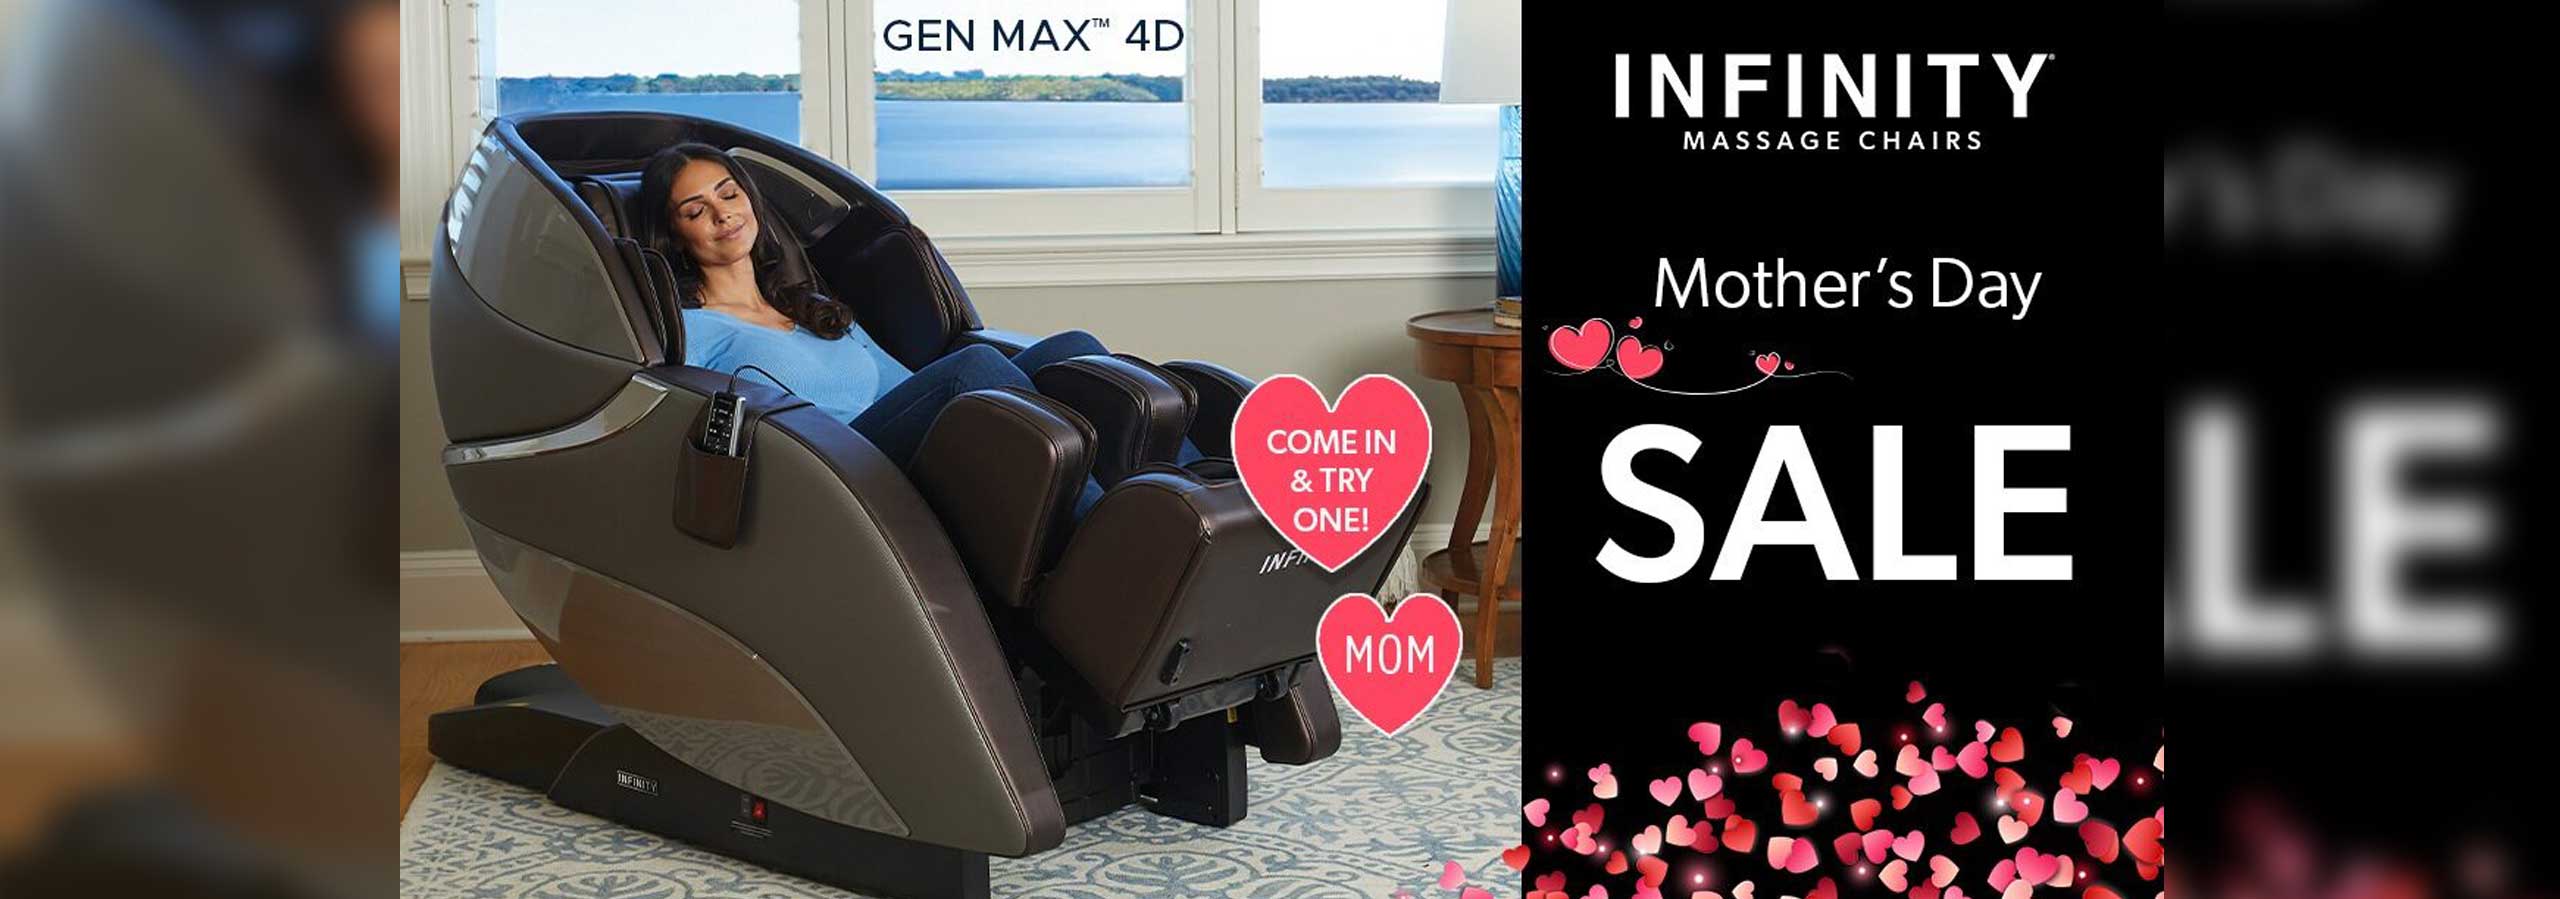 Mother's Day Sale - Gen Max 4D - Shop In-Store Now